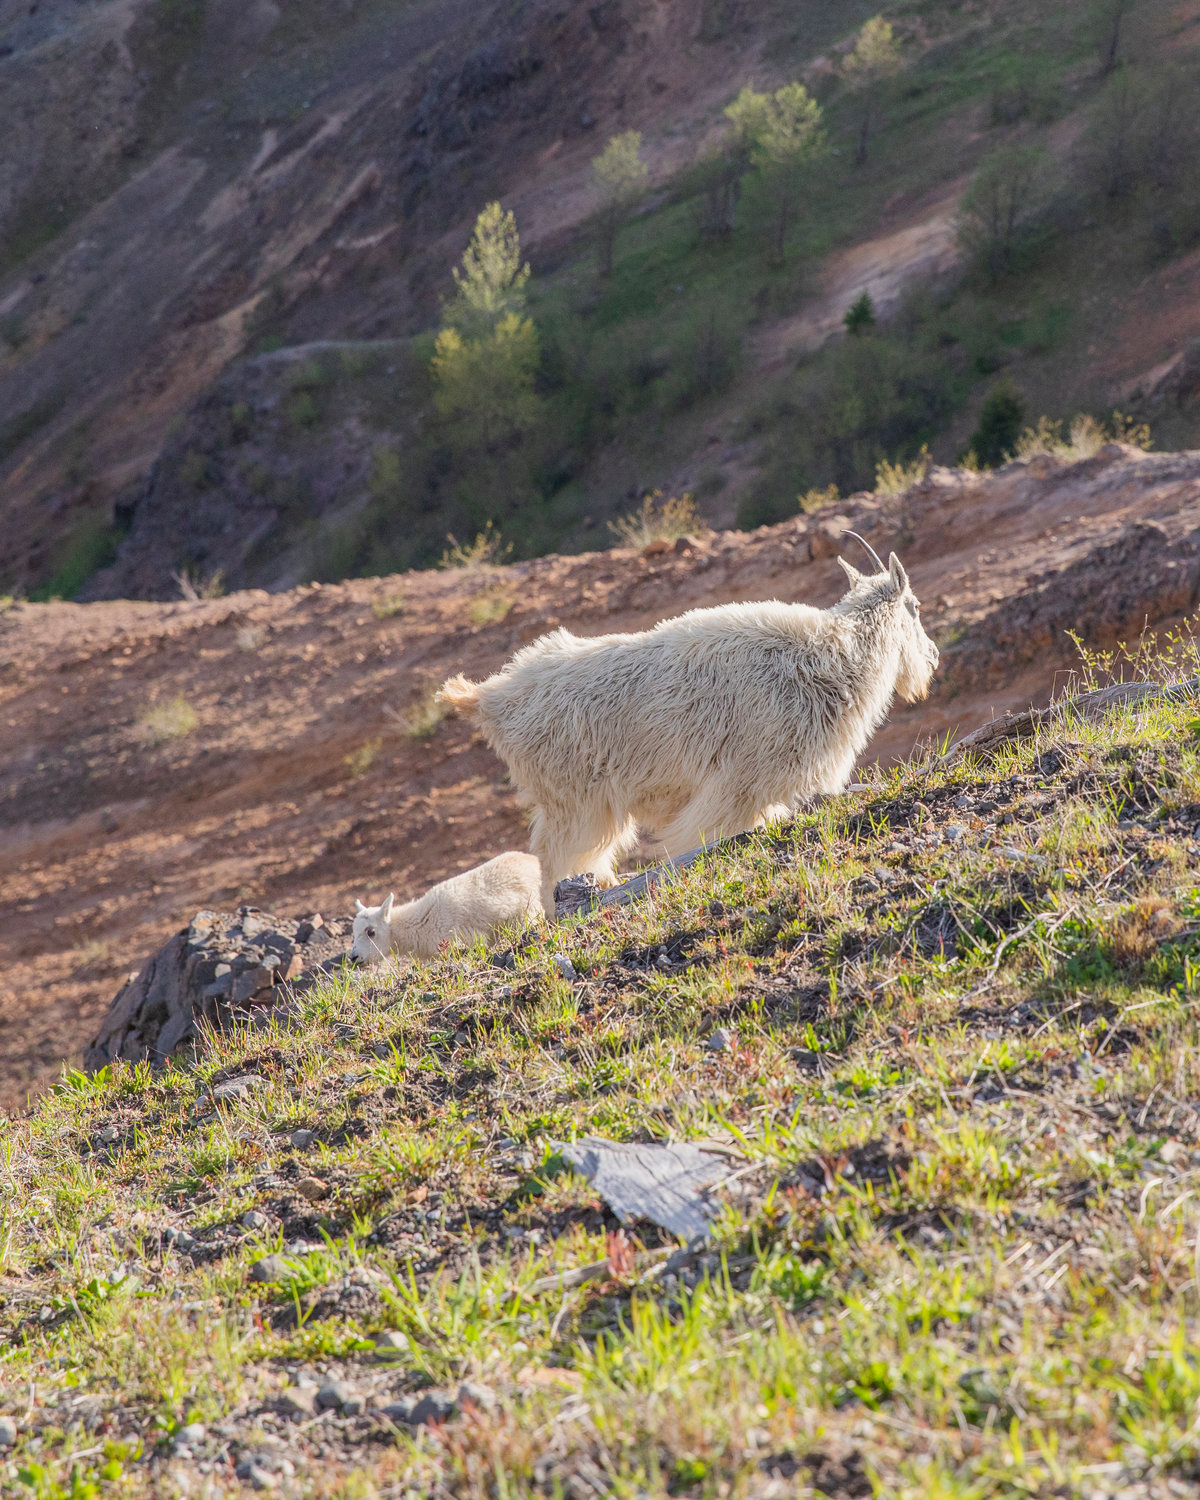 A mountain goat and kid graze below a trail in the Mount Margaret Backcountry in the Gifford Pinchot National Forest on Wednesday.